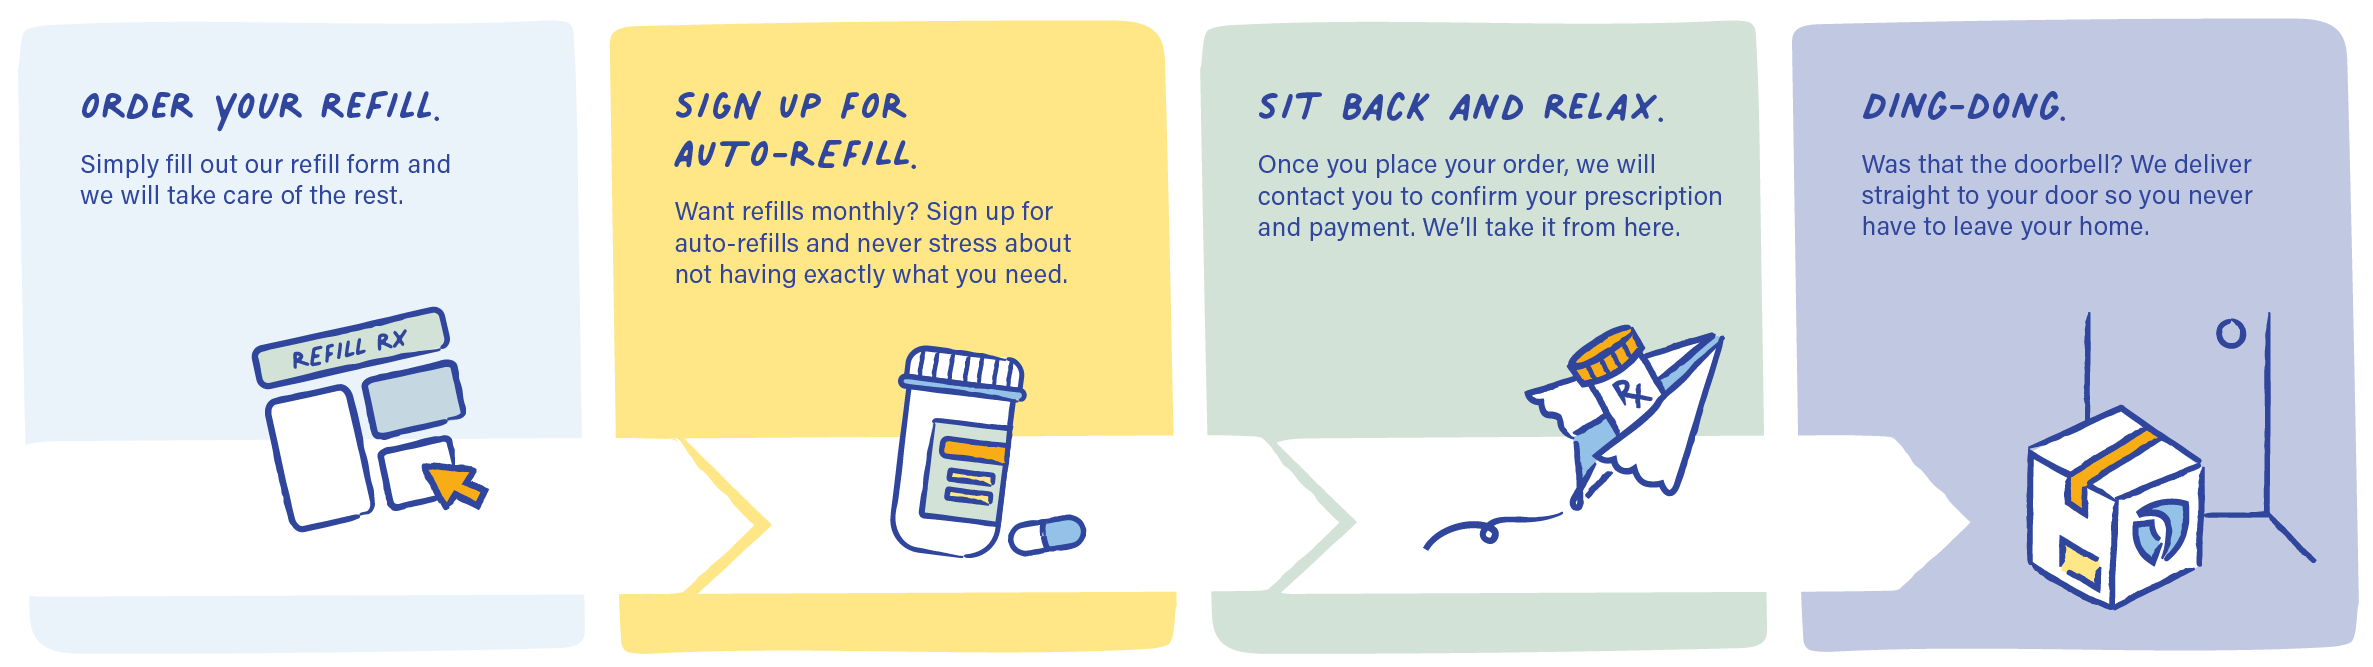 Steps to prescription refill including auto-refills and delivery to your door